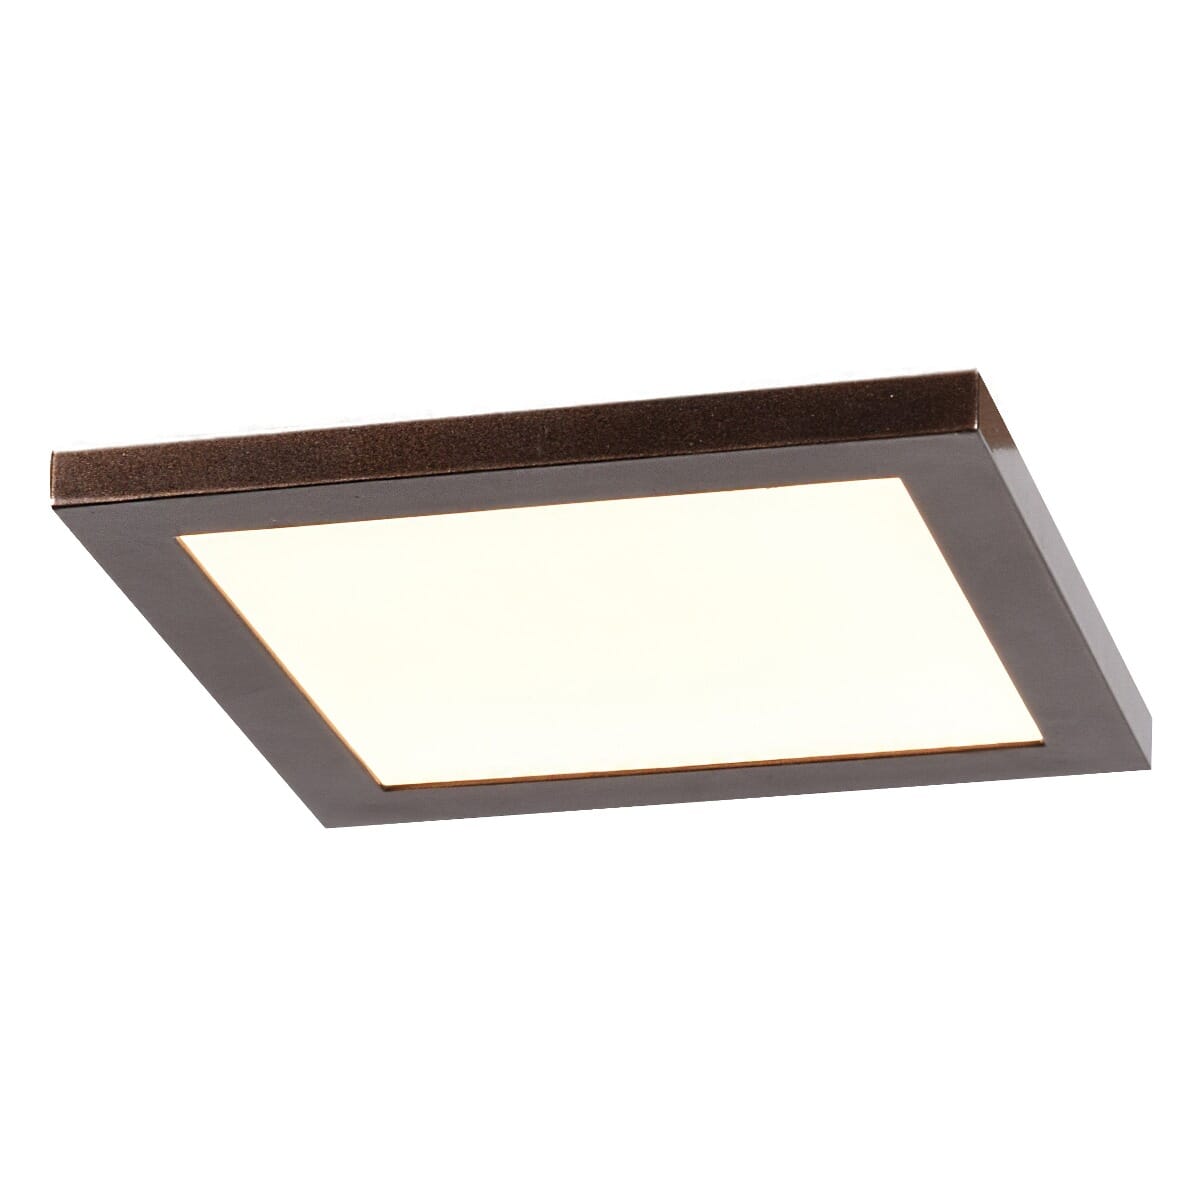 Access Boxer 10" Ceiling Light in Bronze